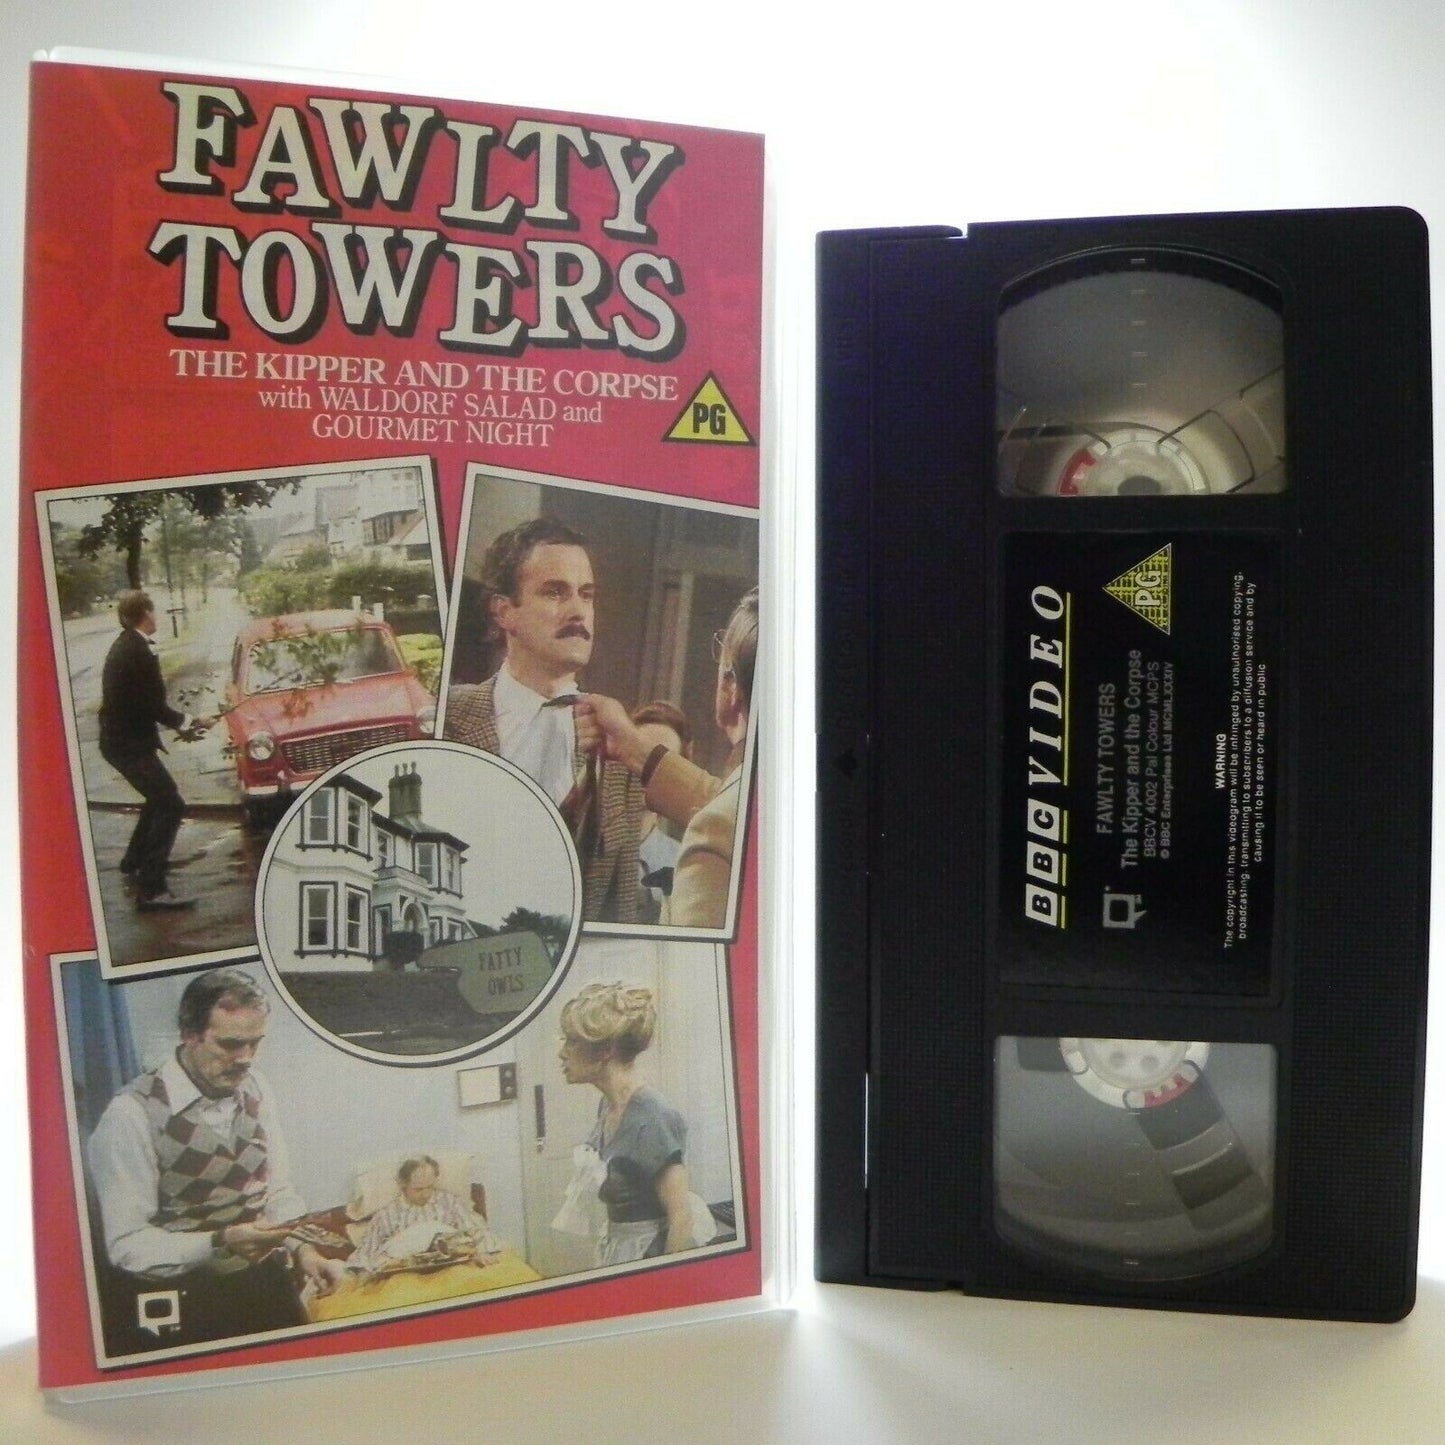 Fawlty Towers: The Kipper And The Corpse - Classic TV Show - Pre-Cert - Pal VHS-